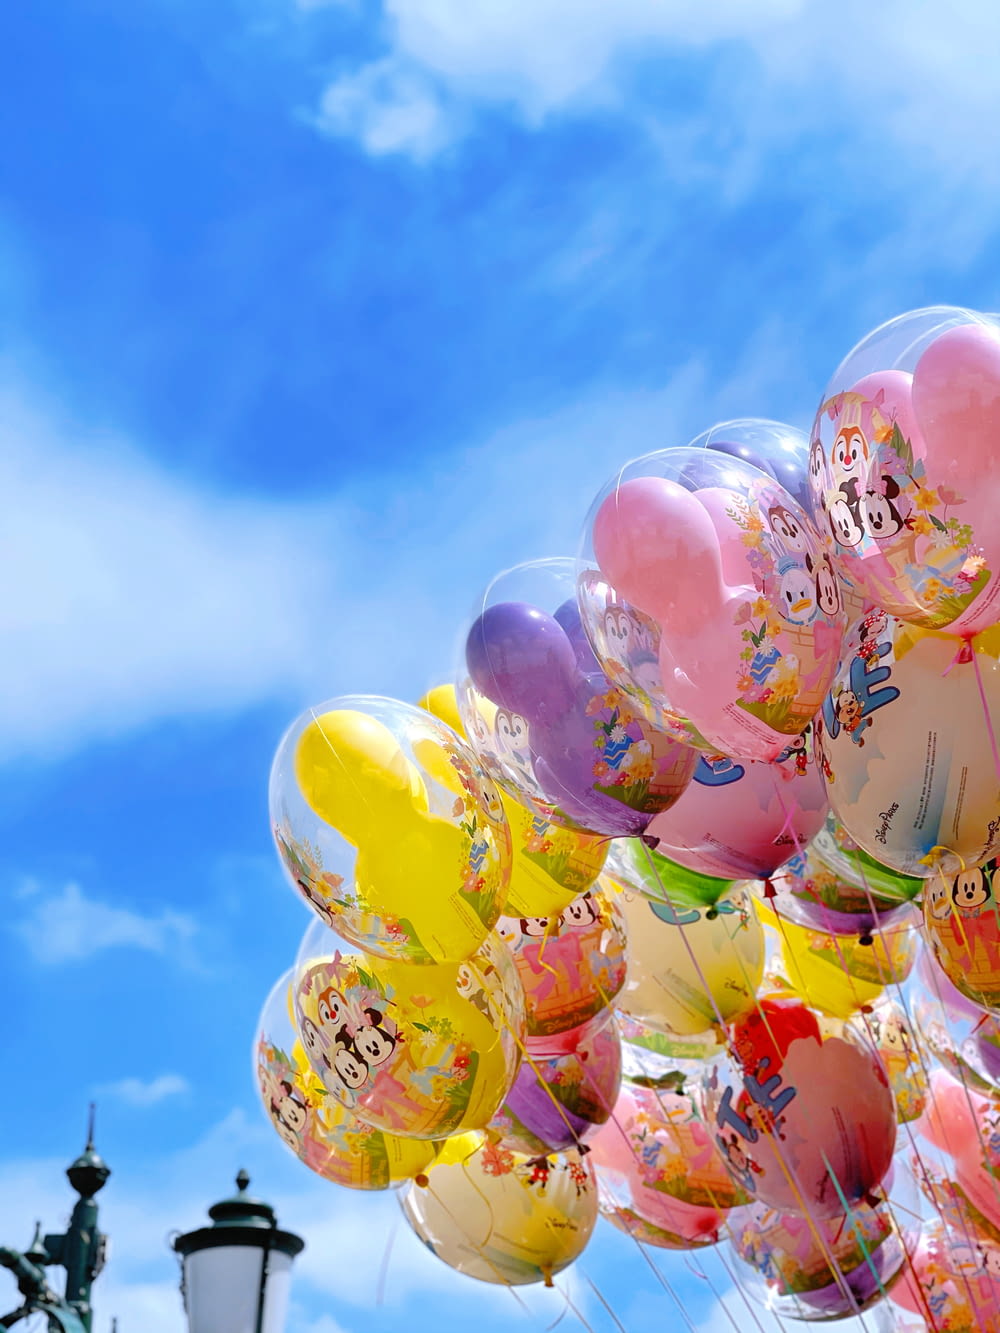 yellow red and blue balloons under blue sky during daytime